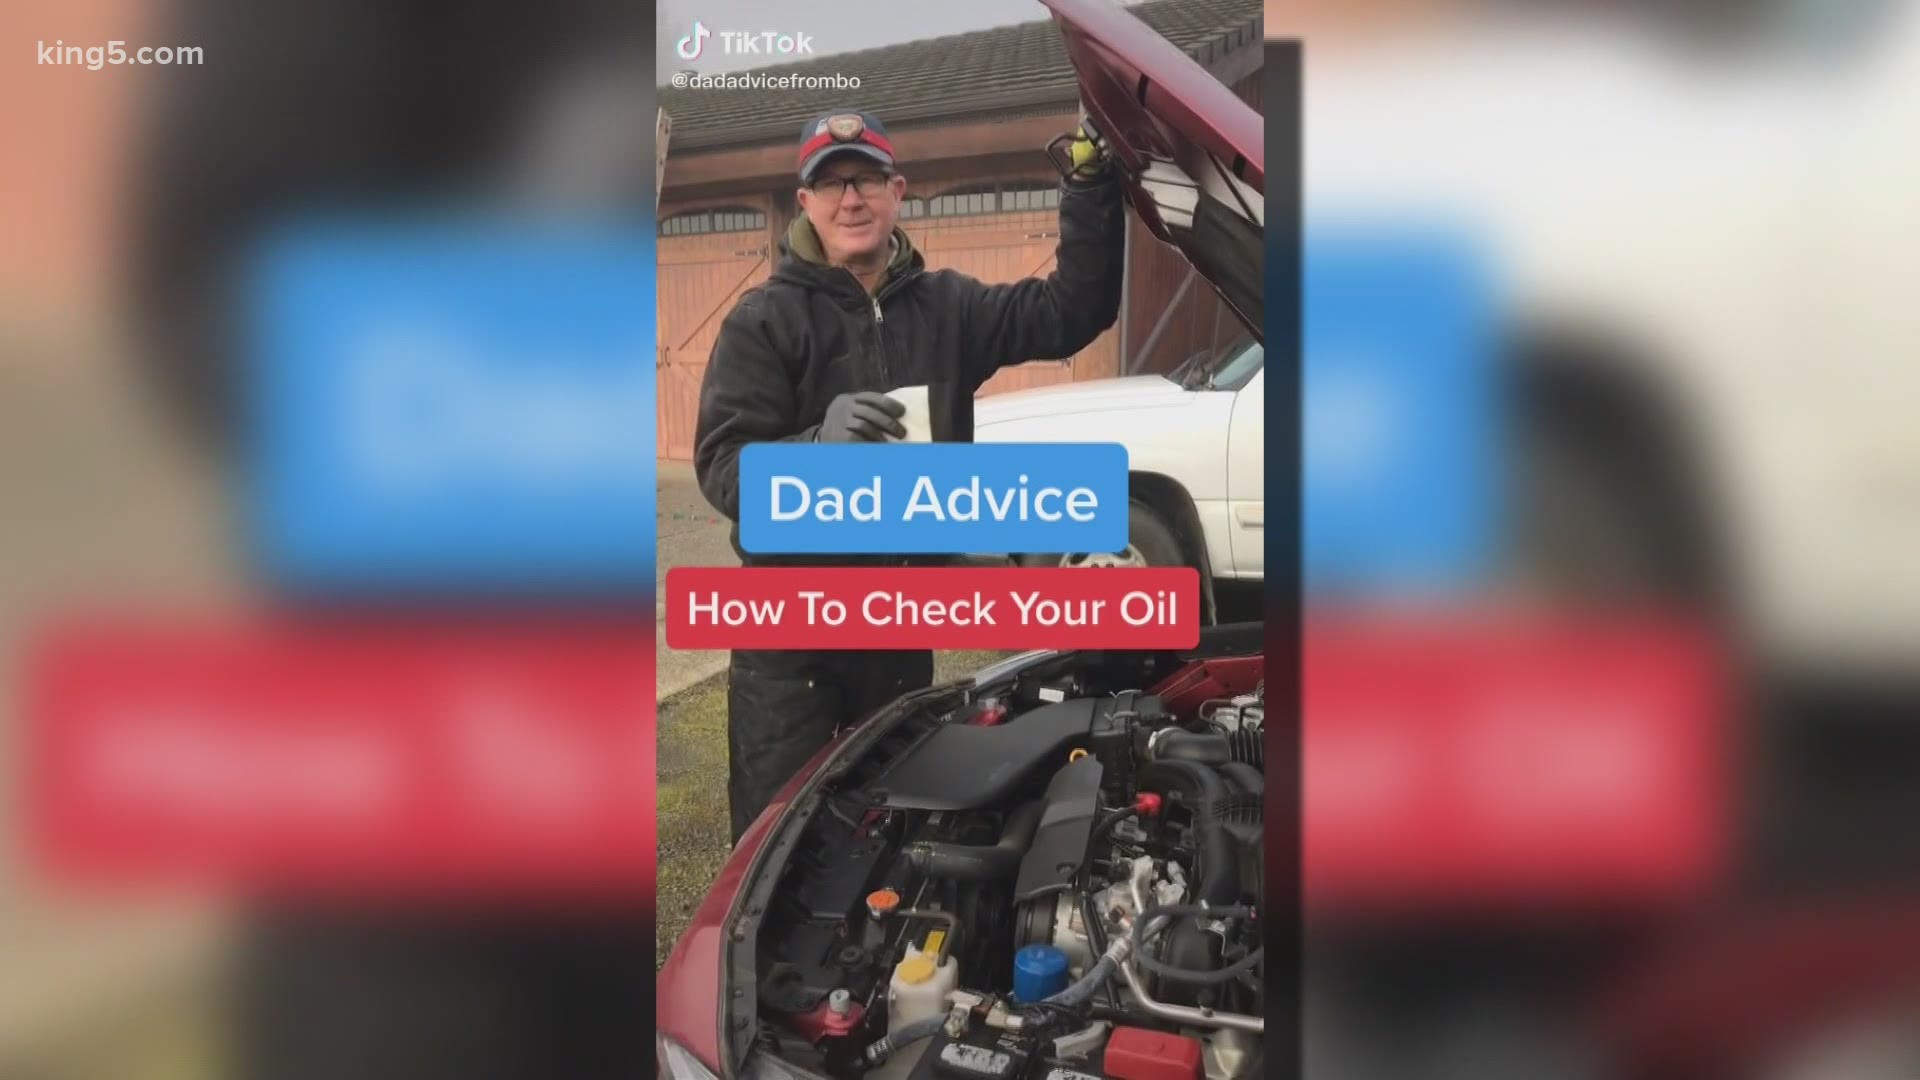 A Leavenworth father/daughter duo's "dad advice" TikTok channel is providing useful info. It has also lead to generous donations from viewers.